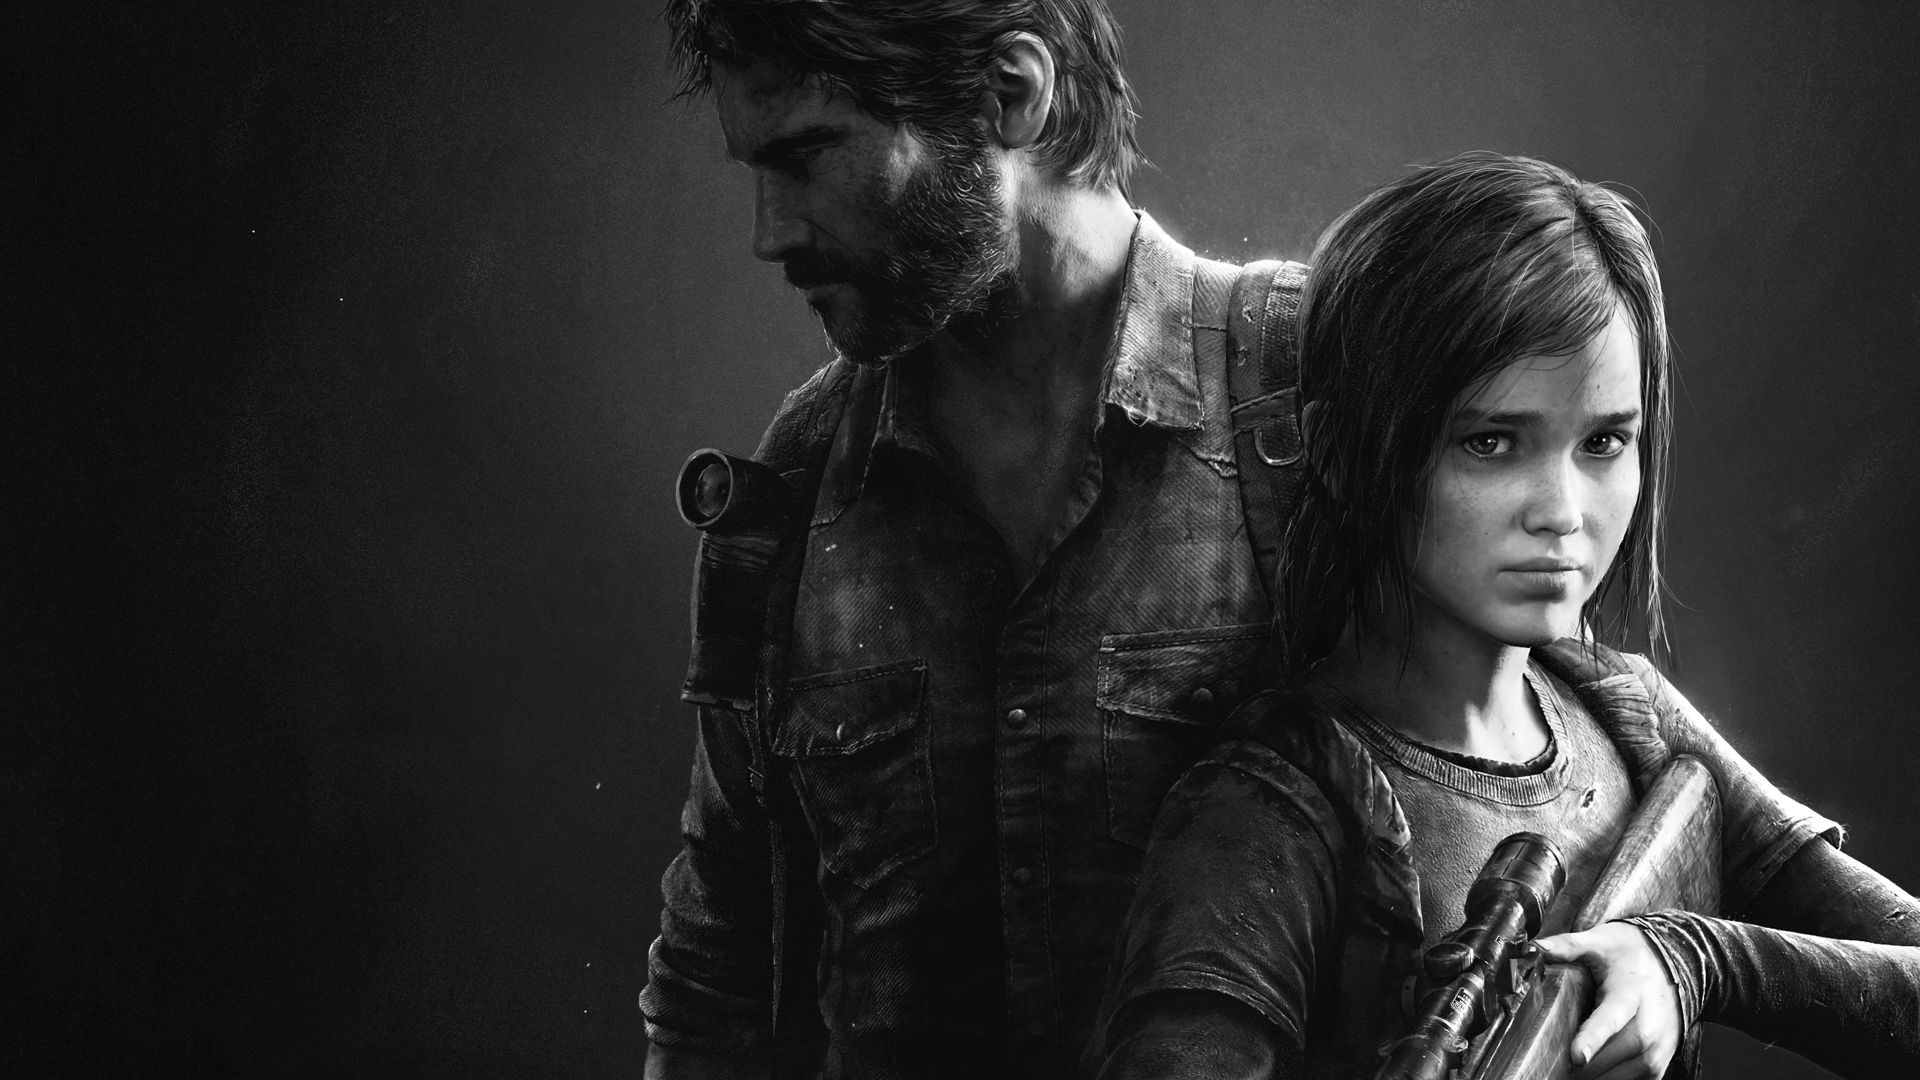 The Last of Us Part II Remastered для PS5